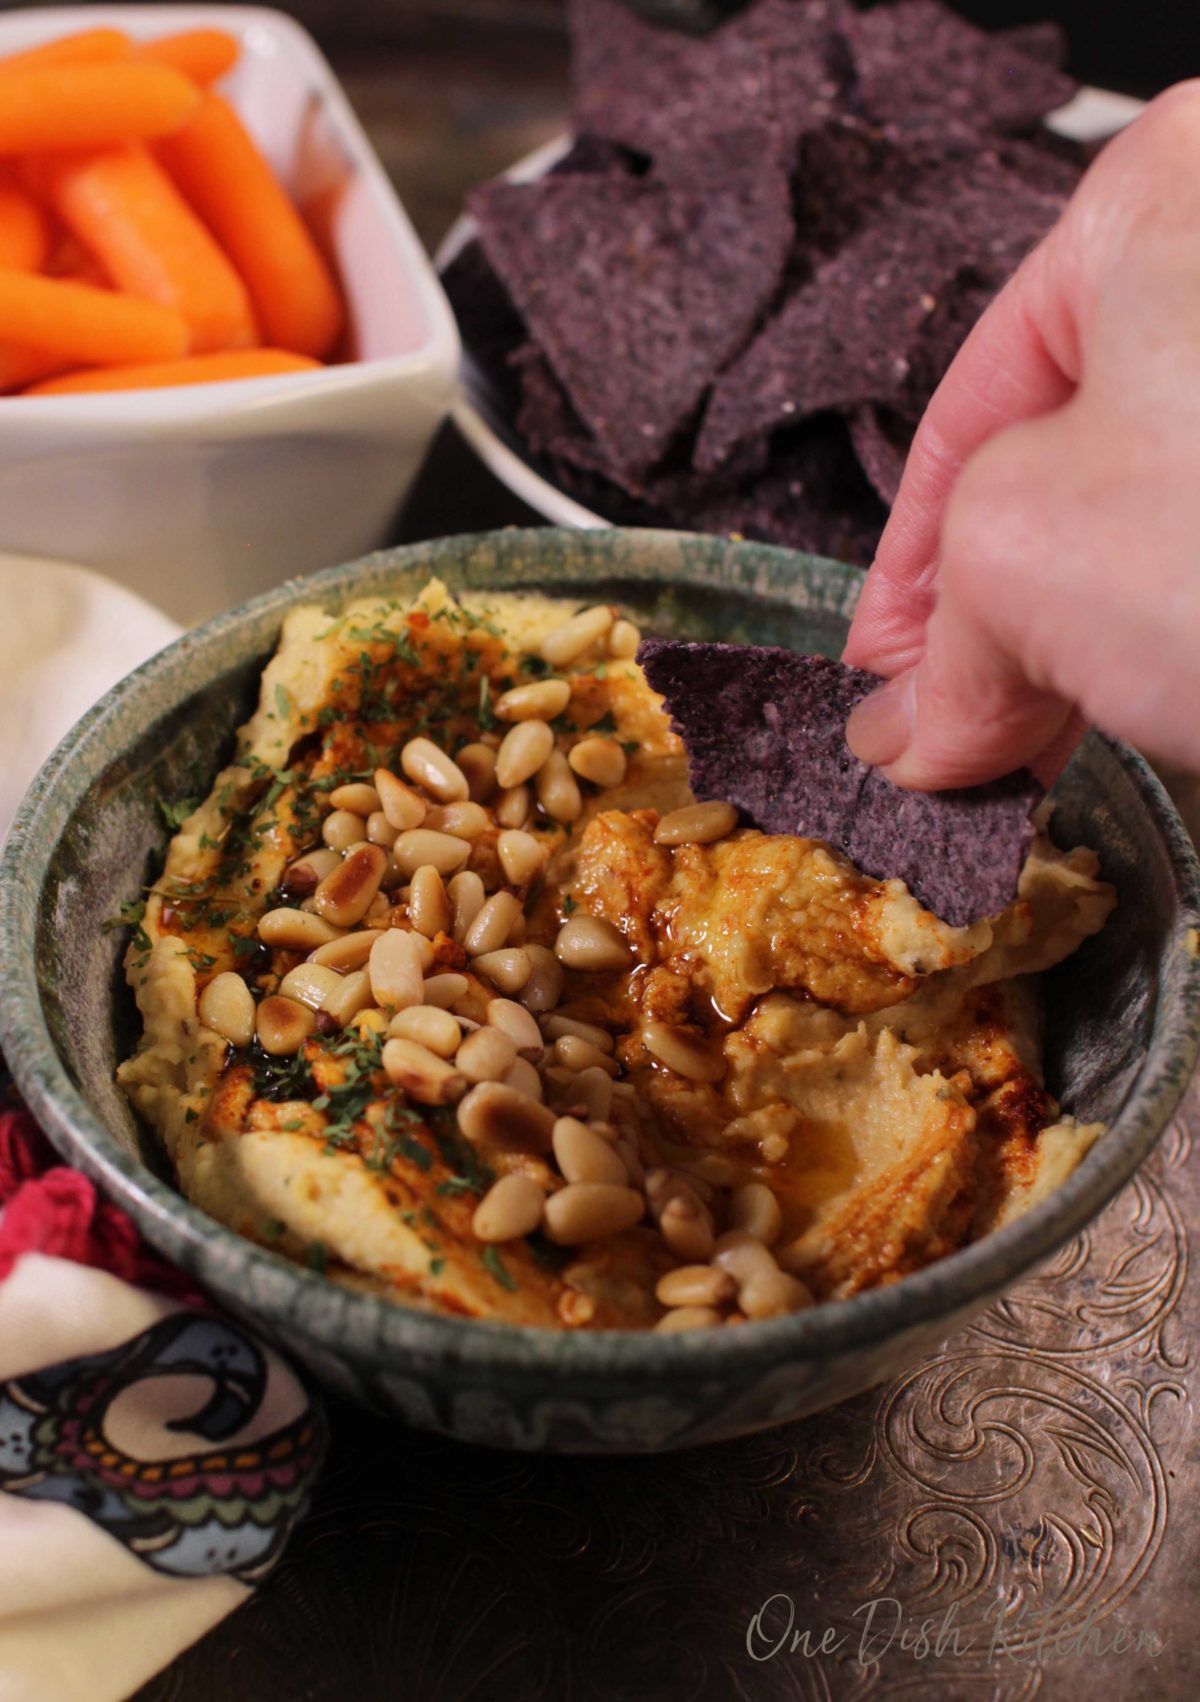 A blue corn chip scooping out hummus from a bowl that is topped with toasted pine nuts, olive oil, and paprika next to a bowl of blue corn tortilla chips and a small bowl of baby carrots.